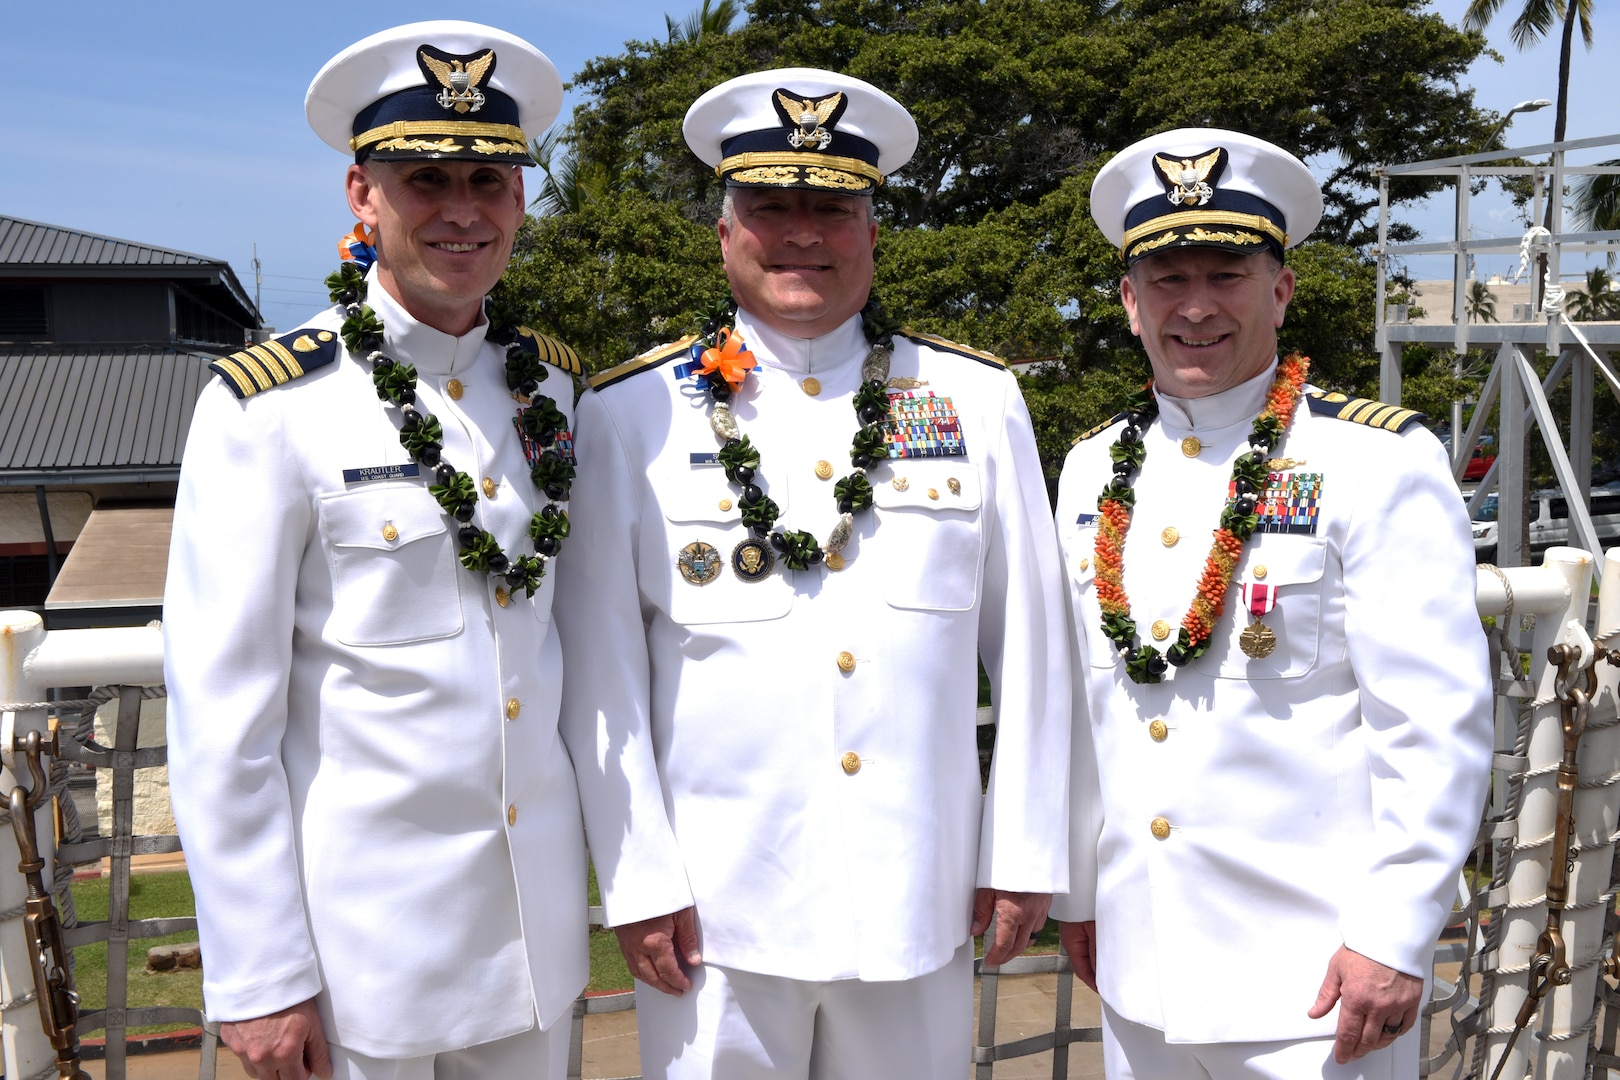 Capt. Brian Krautler, Rear Adm. Matthew Sibley and Capt. Stephen Adler (left to right) pose for a photo after a change of command ceremony for the U.S. Coast Guard Cutter Stratton (WMSL 752) at Base Honolulu, April 17, 2023. Rear Adm. Sibley presided over the ceremony in which Capt. Krautler assumed duties as the ship's new commanding officer. (U.S. Coast Guard photo by Petty Officer 2nd Class Michael Clark)